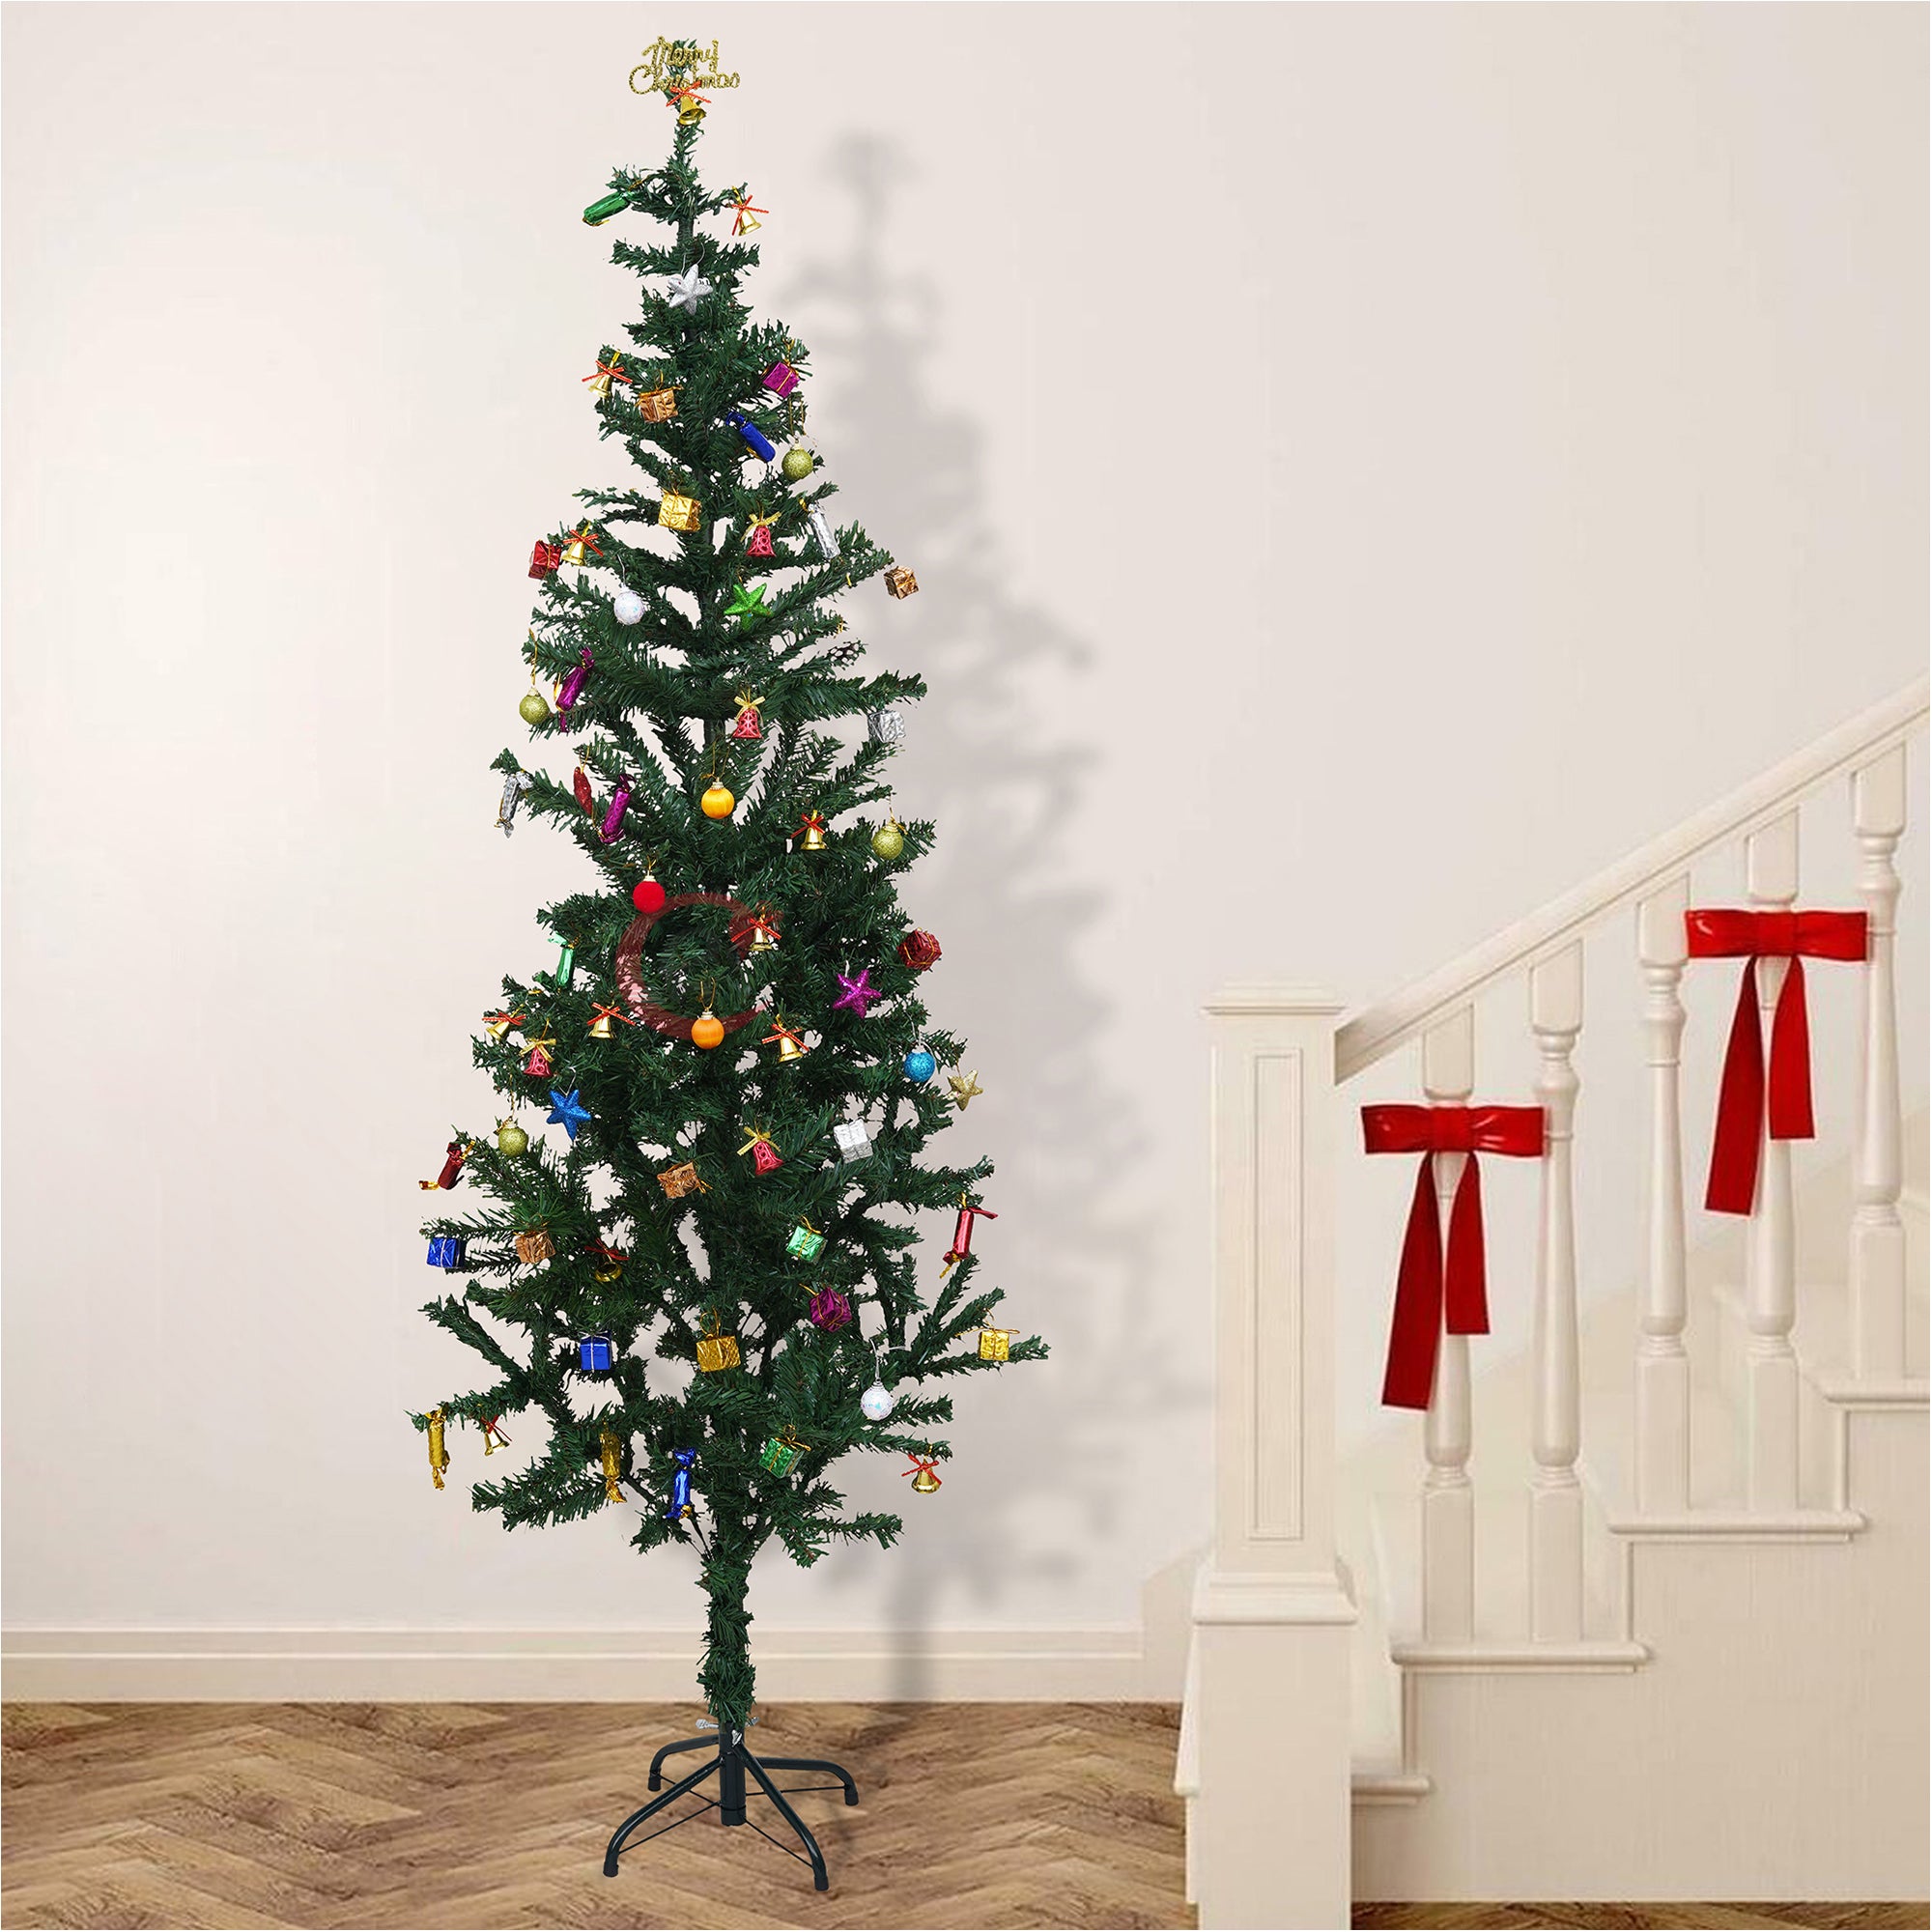 eCraftIndia 5 Feet Green Artificial Christmas Tree Xmas Pine Tree with Metal Stand - Xmas Tree for Indoor, Outdoor, Home, Living Room, Office, Church Decor - Merry Christmas Decoration Item 5